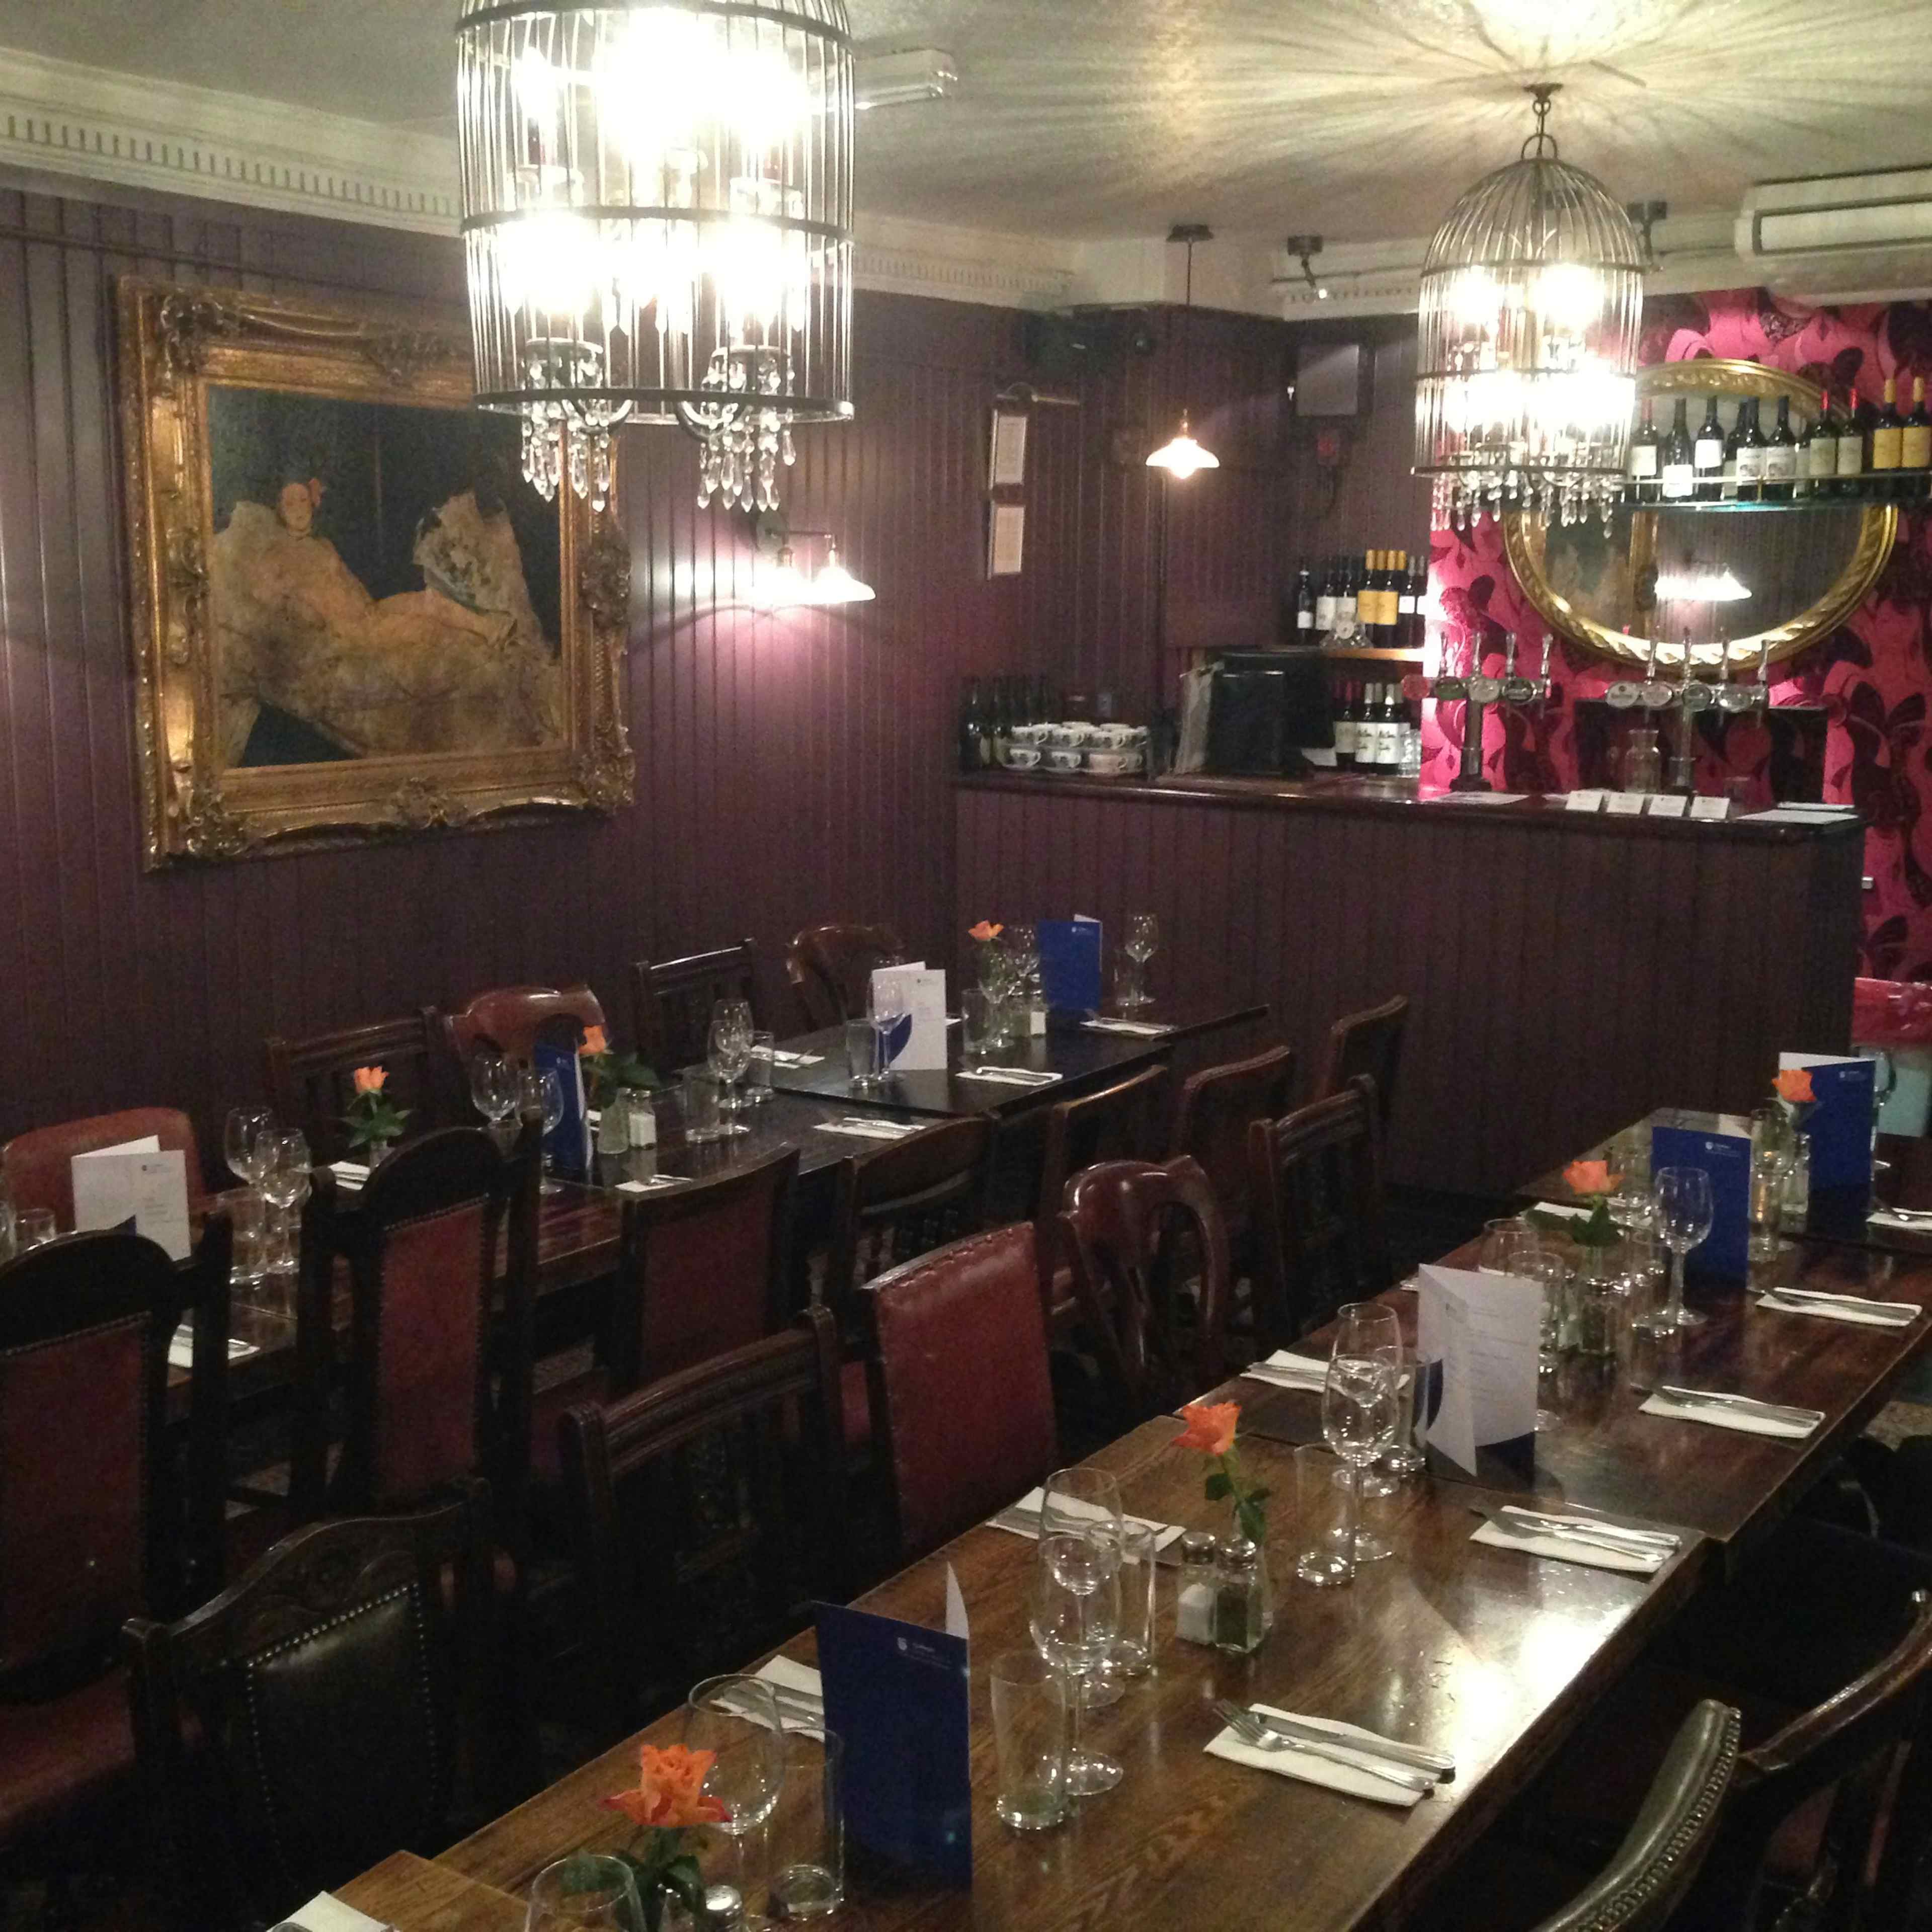 Market Tavern - The Chesterfield Room image 1